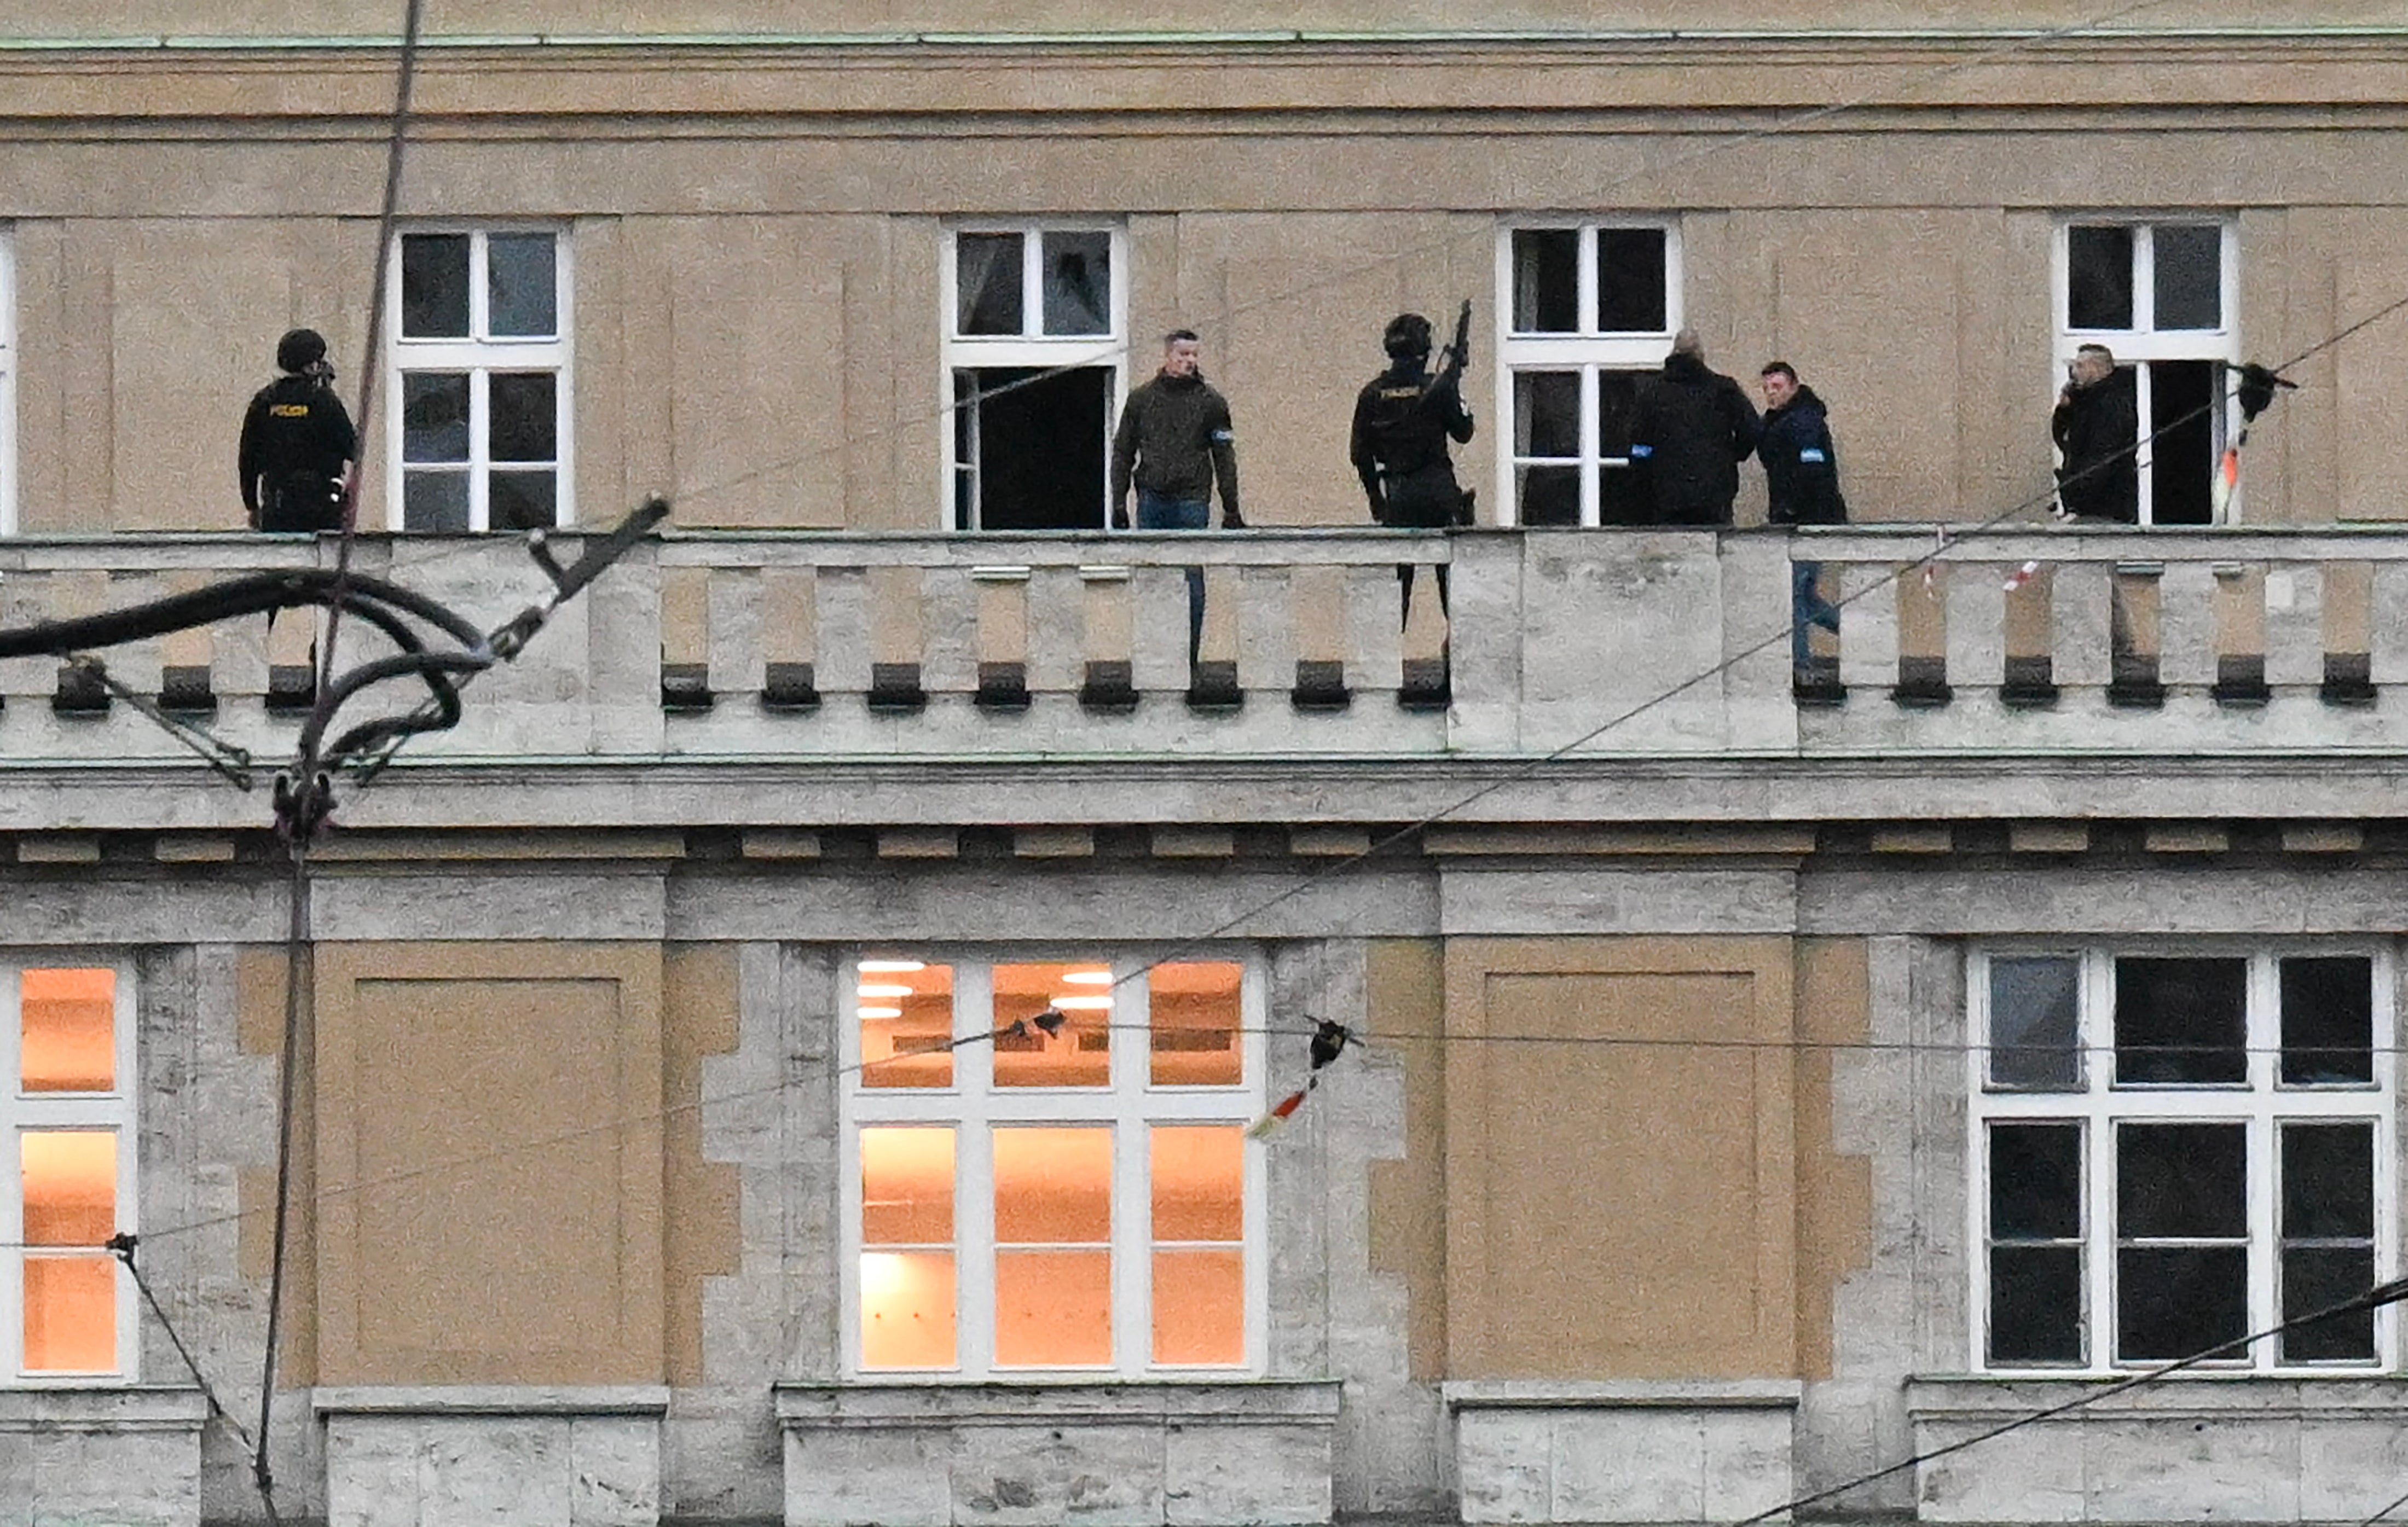 Armed police are seen on the balcony of the university in central Prague